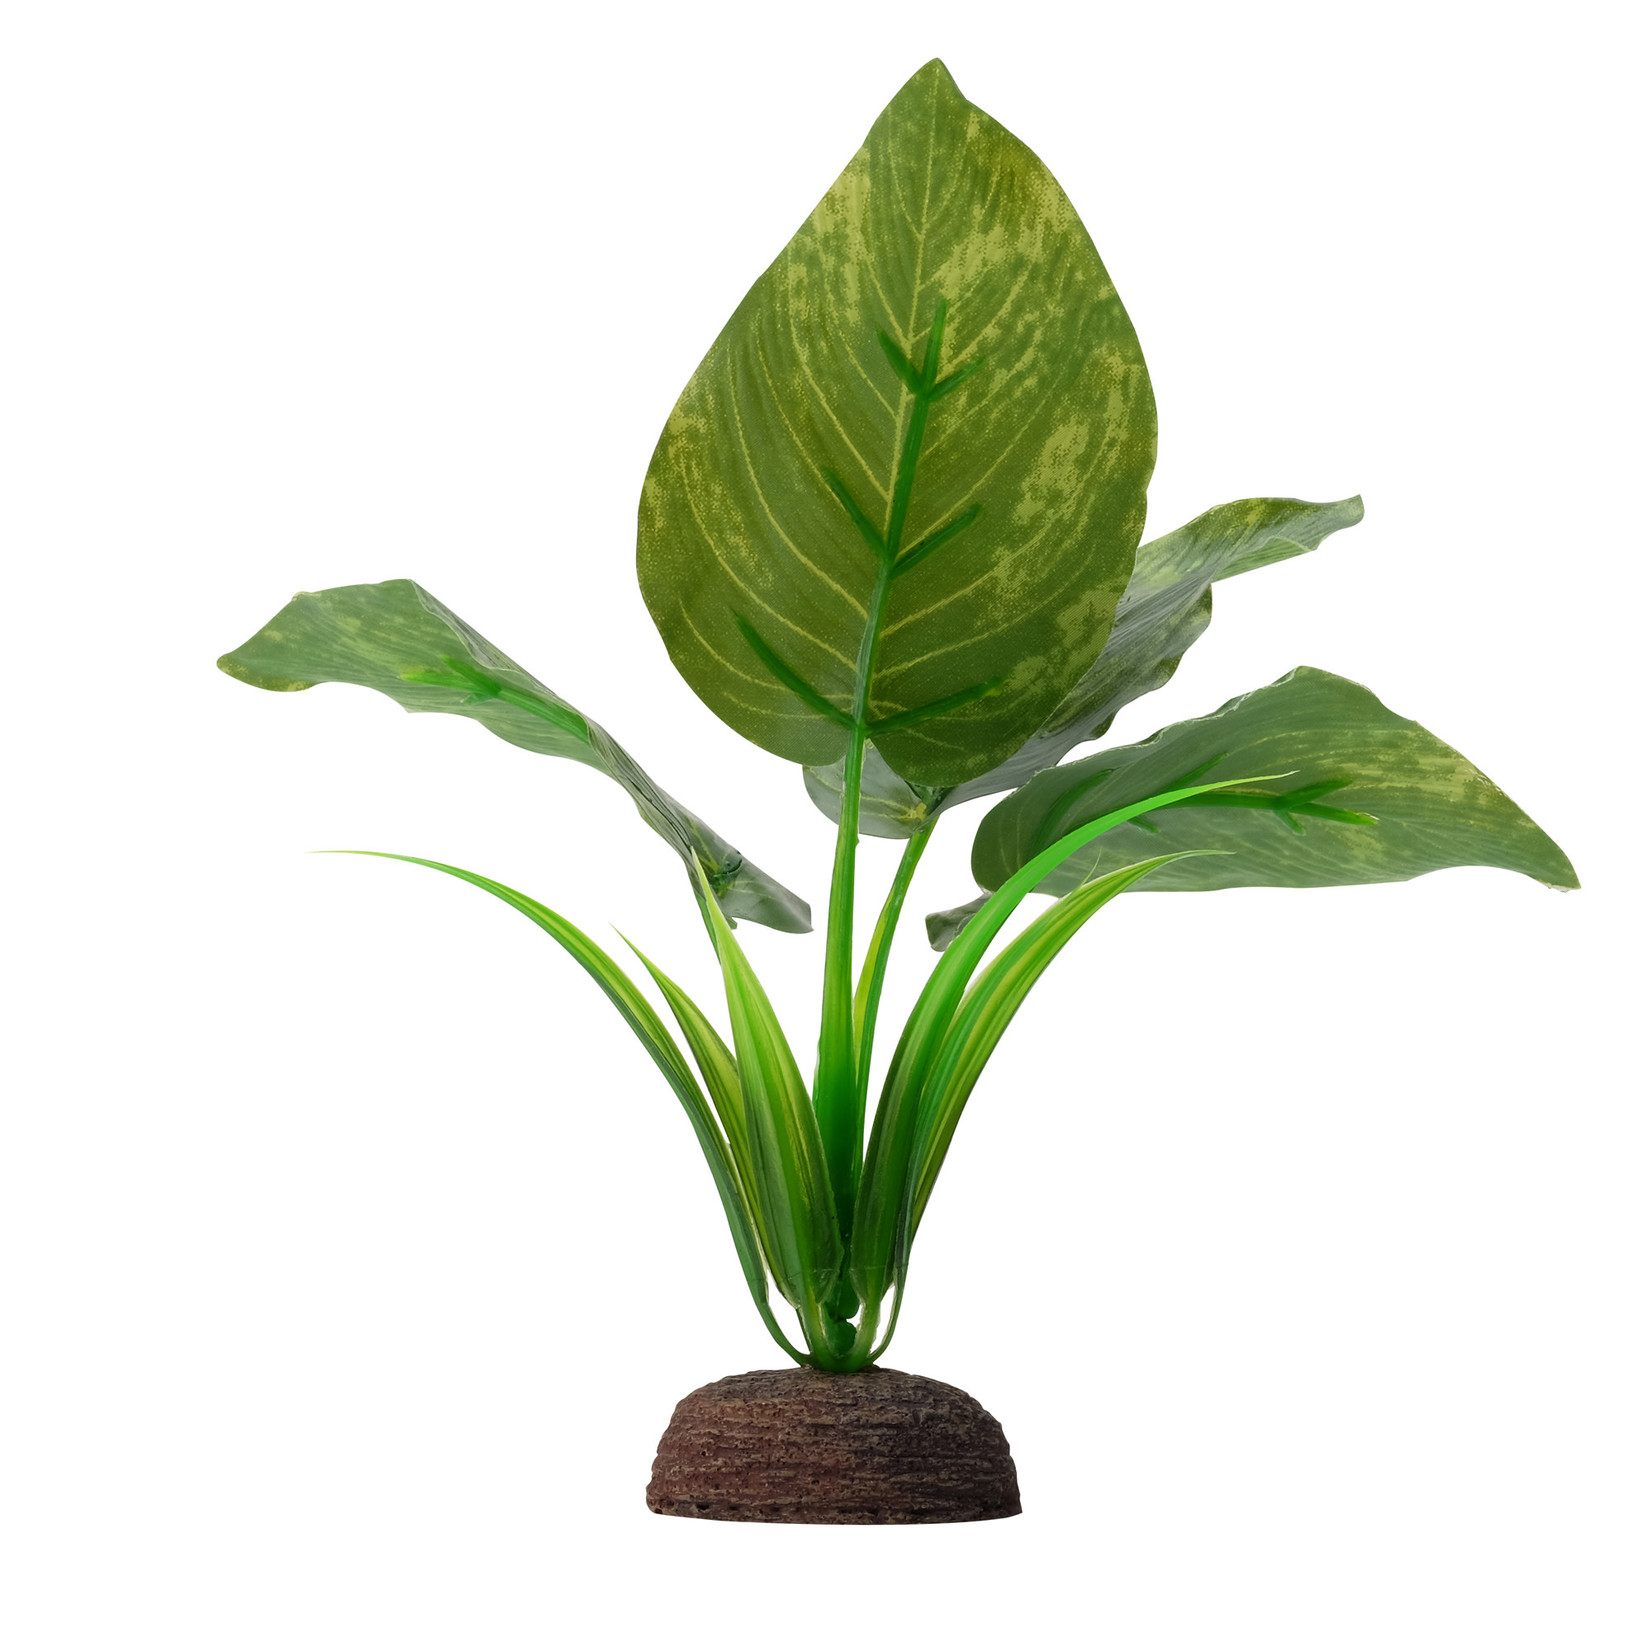 FLUVAL (D) Fluval Aqualife Plant Scapes Variegated Lizard's Tail - 15 cm (6 in)